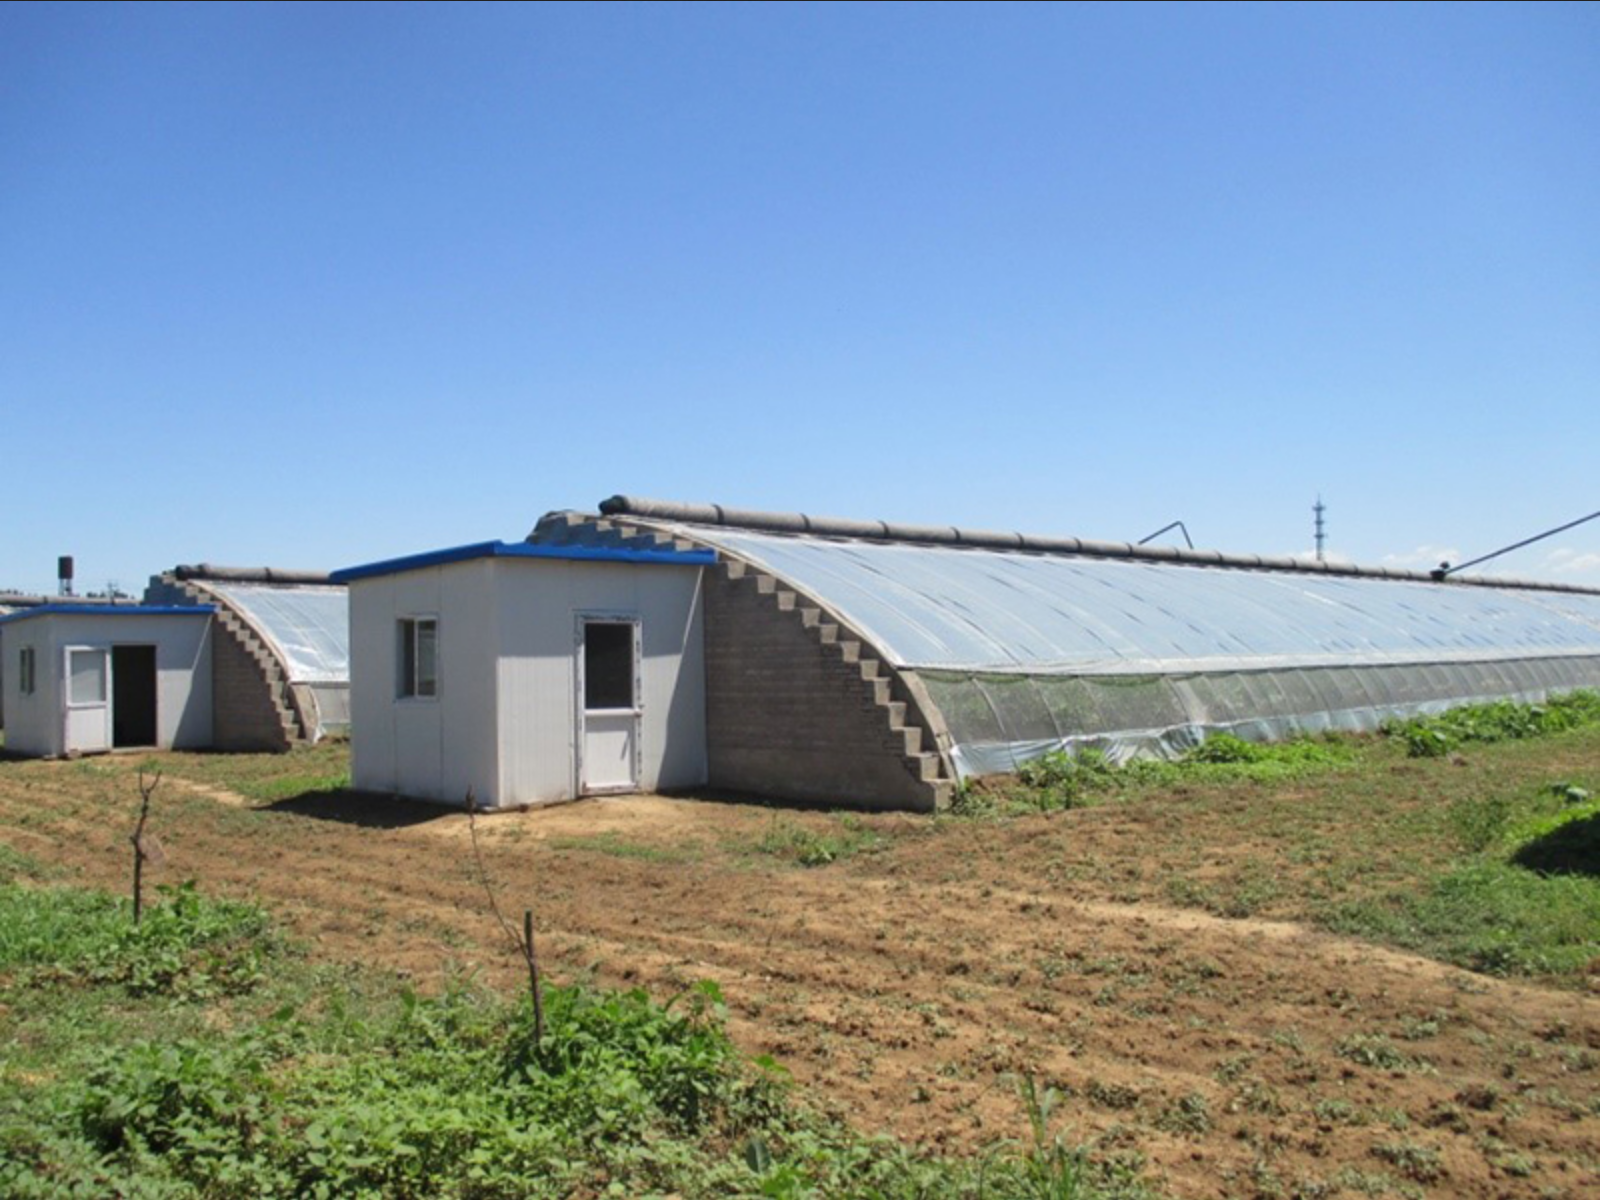 Outside view of Chinese-style solar greenhouses.